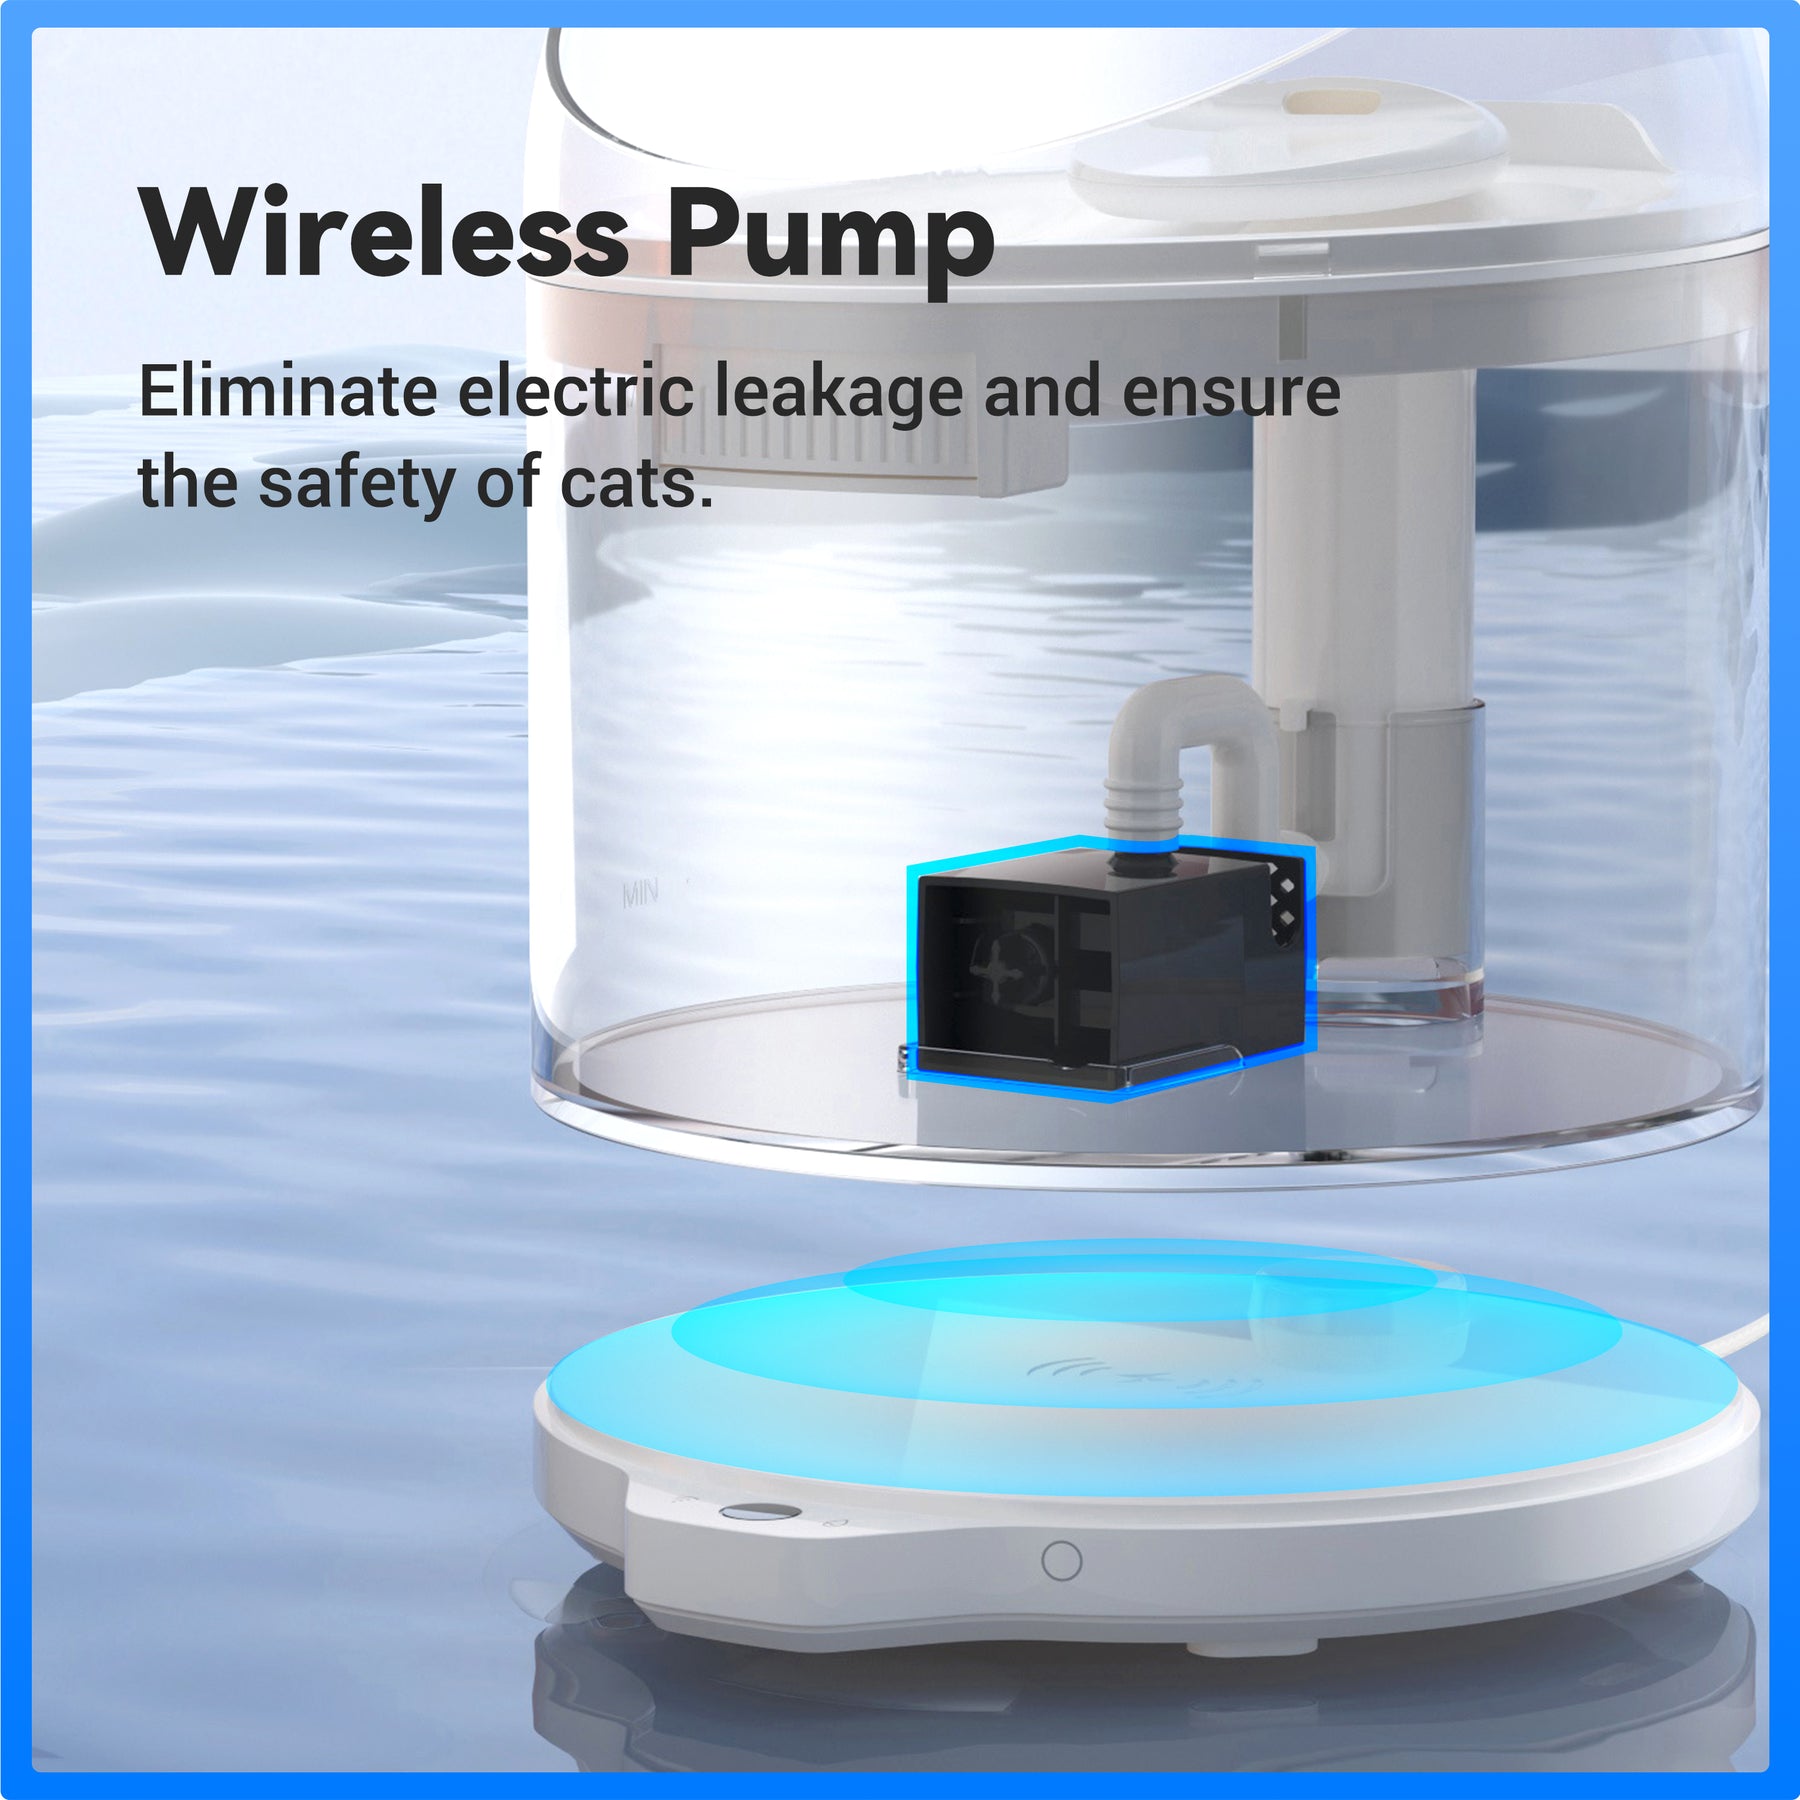 CATLINK Wireless Pump & Ultra-Filtration Water Fountain - PURE 2